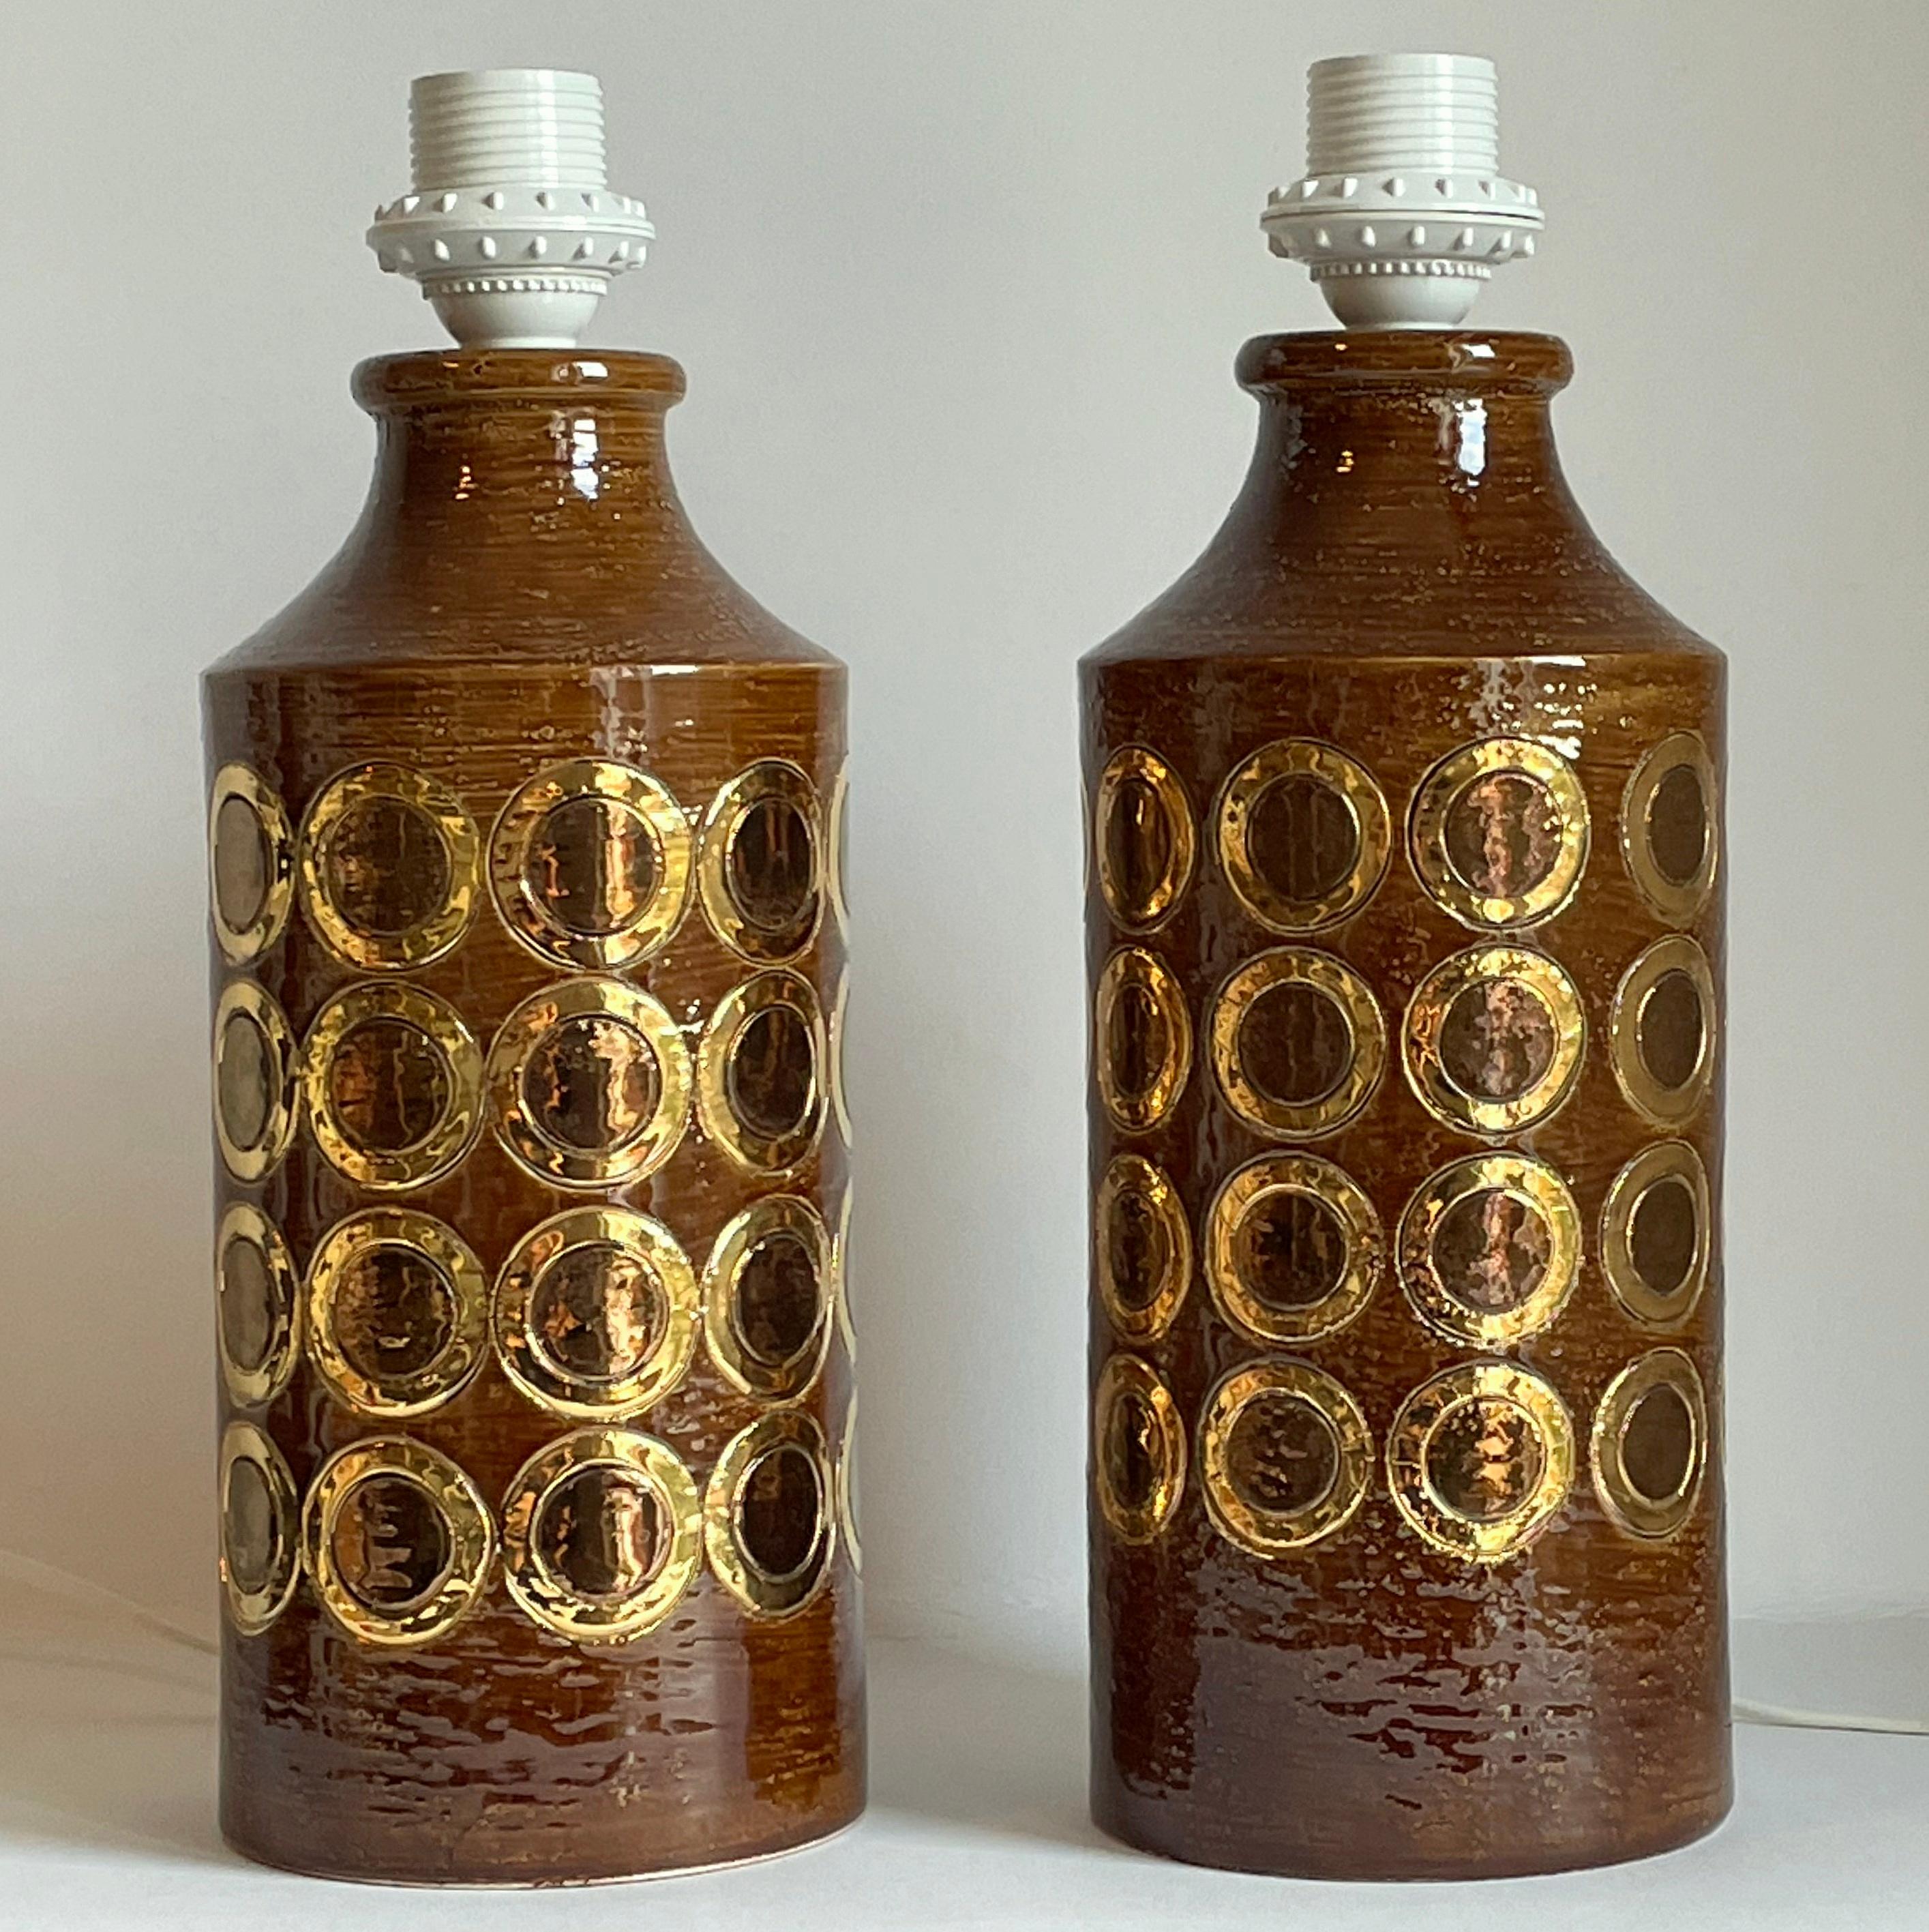 A rare pair of Italian ceramic table lamps by Bitossi. These lamps has beautiful circles glazed in gold and copper on a brown background. Excellent condition. Just rewired. 
Please note: We are selling these lamps without the lamp shades. 


